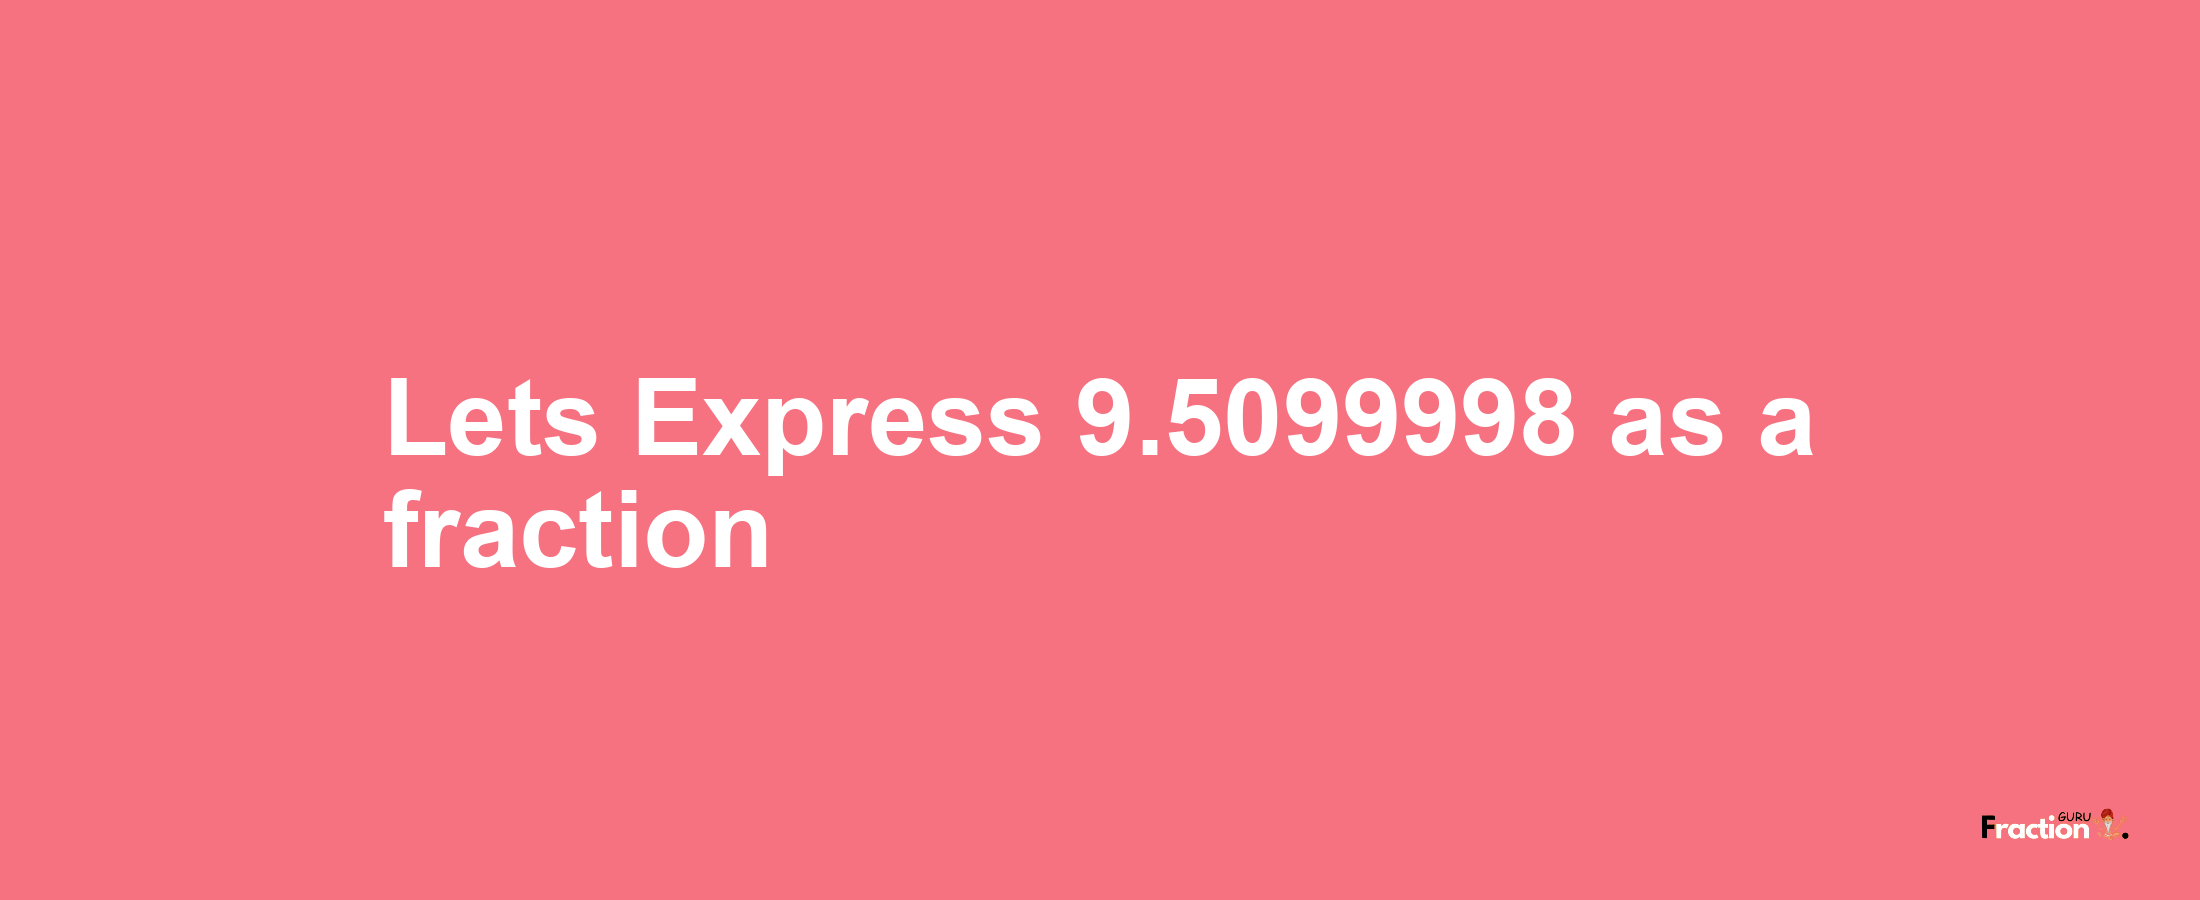 Lets Express 9.5099998 as afraction